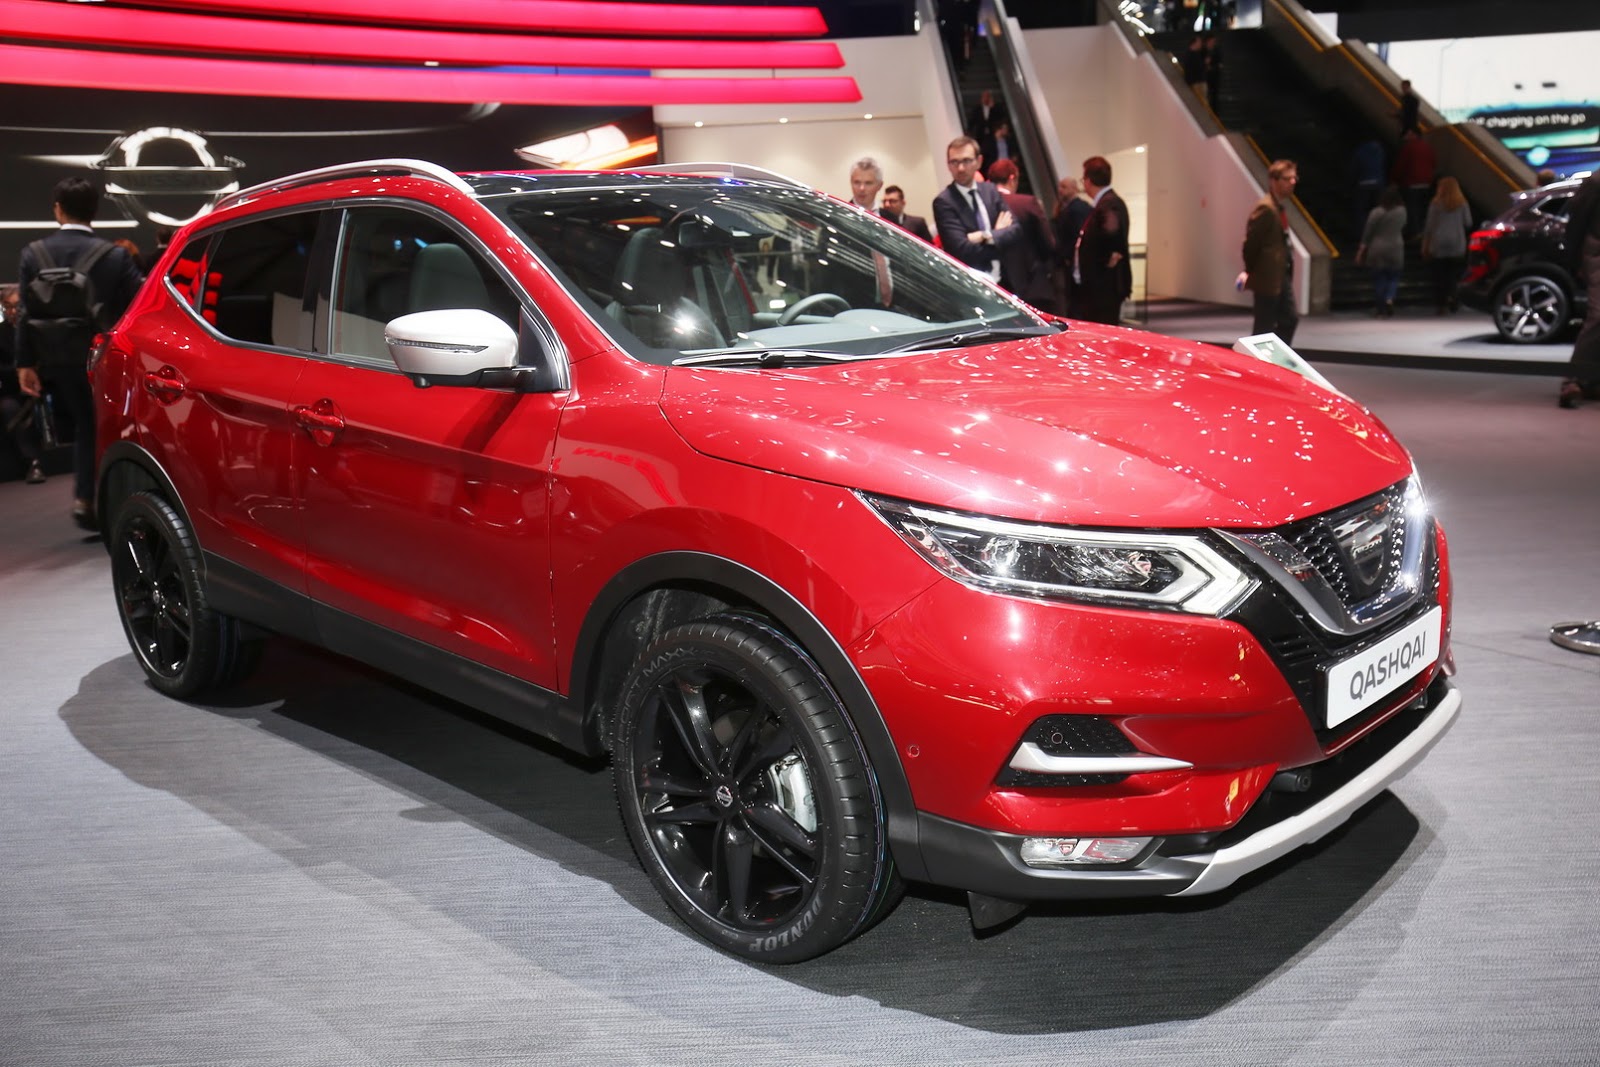 2018 Nissan Qashqai (J11): Coming to the USA from late 2017